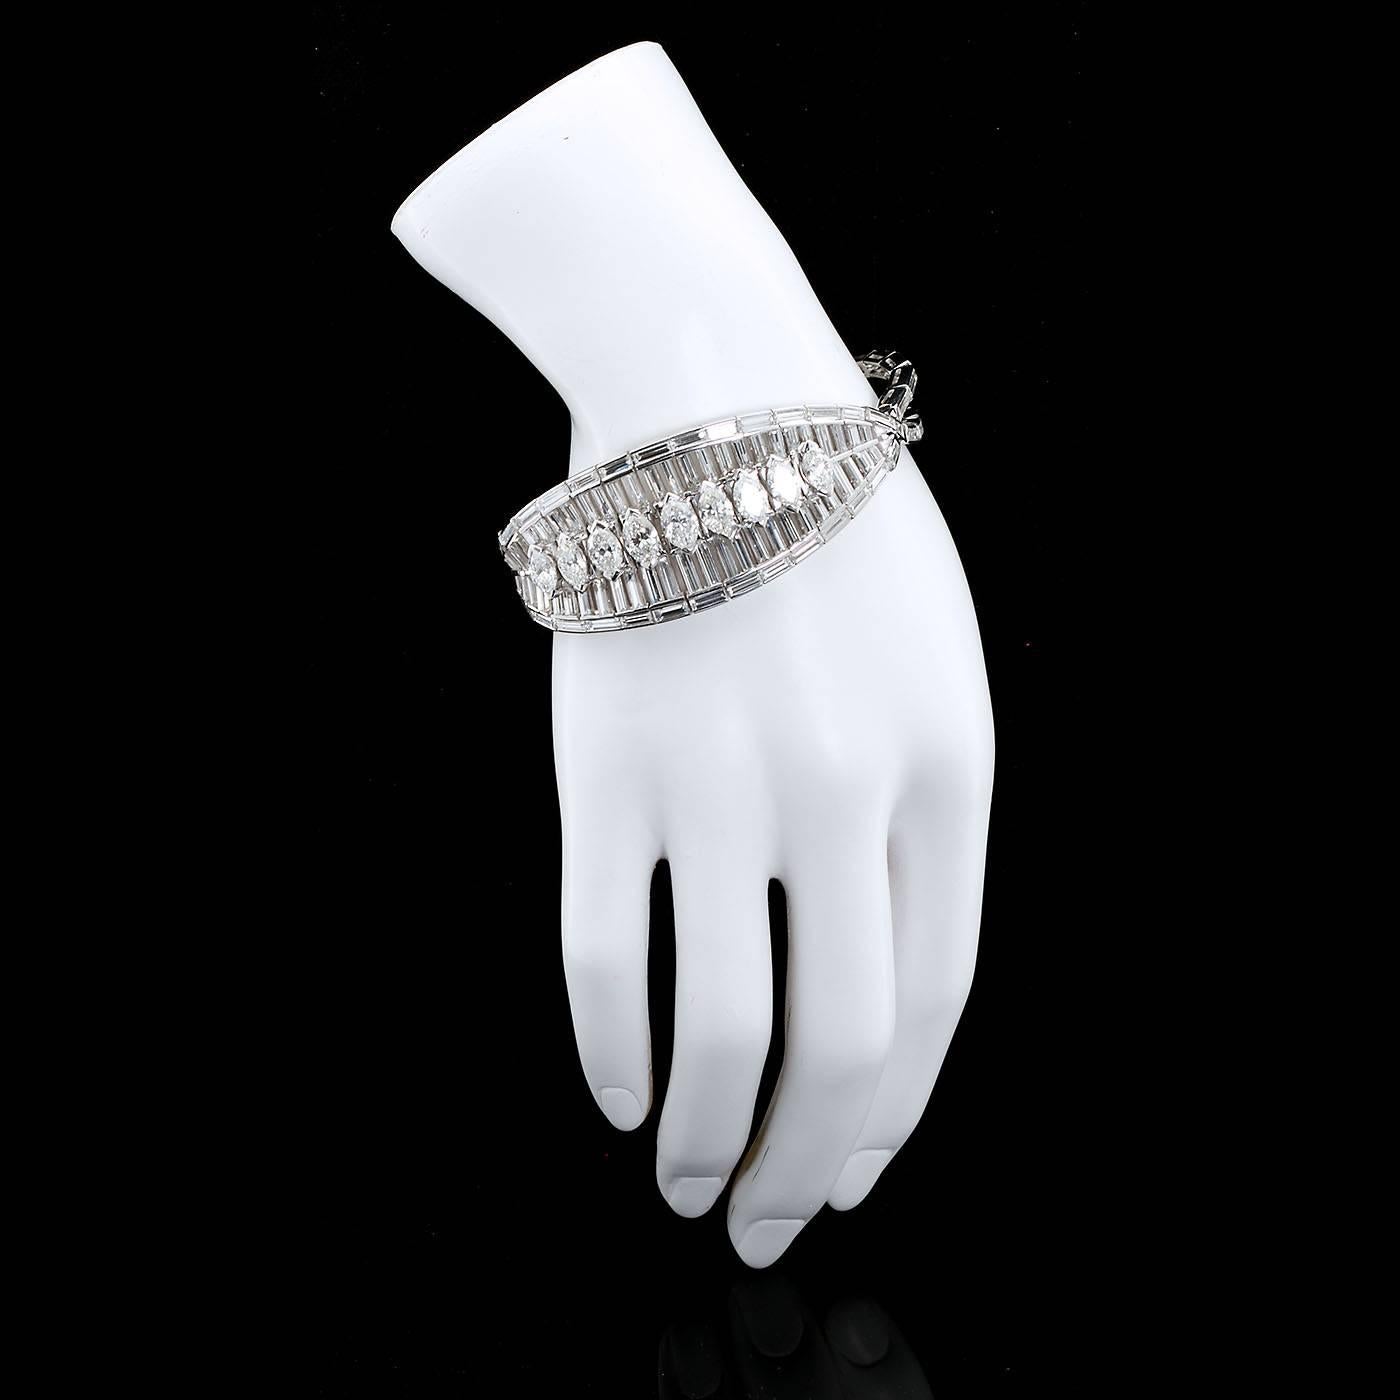 This remarkable circa 1960s bracelet puts your best hand front and center. Exquisite finely crafted platinum channel settings contains 130 calibrated straight diamond baguettes designed as both a trailing border and background to the center tufted